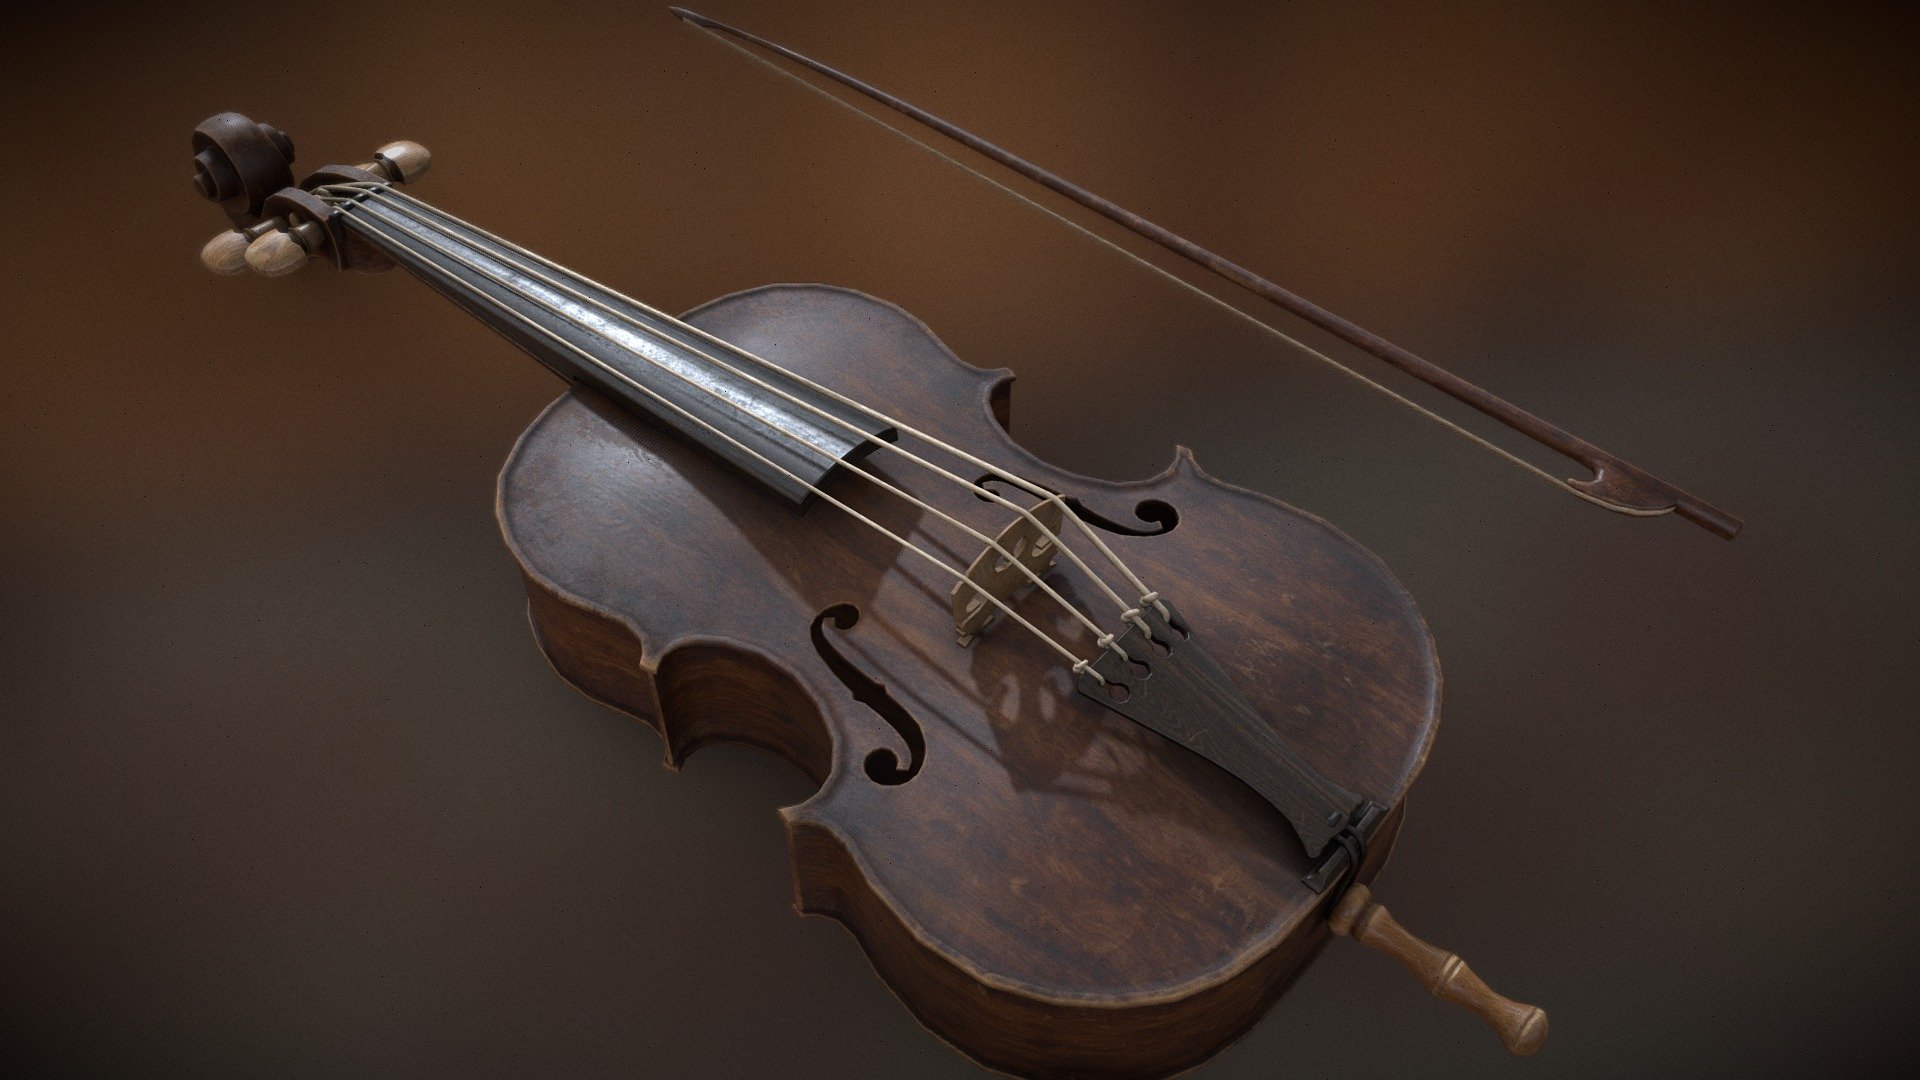 Tenor viola based on museum piece.

https://www.rijksmuseum.nl/en/search/objects?ii=1#/BK-NM-5893,7

Textures are game ready pbr including normal 3d model